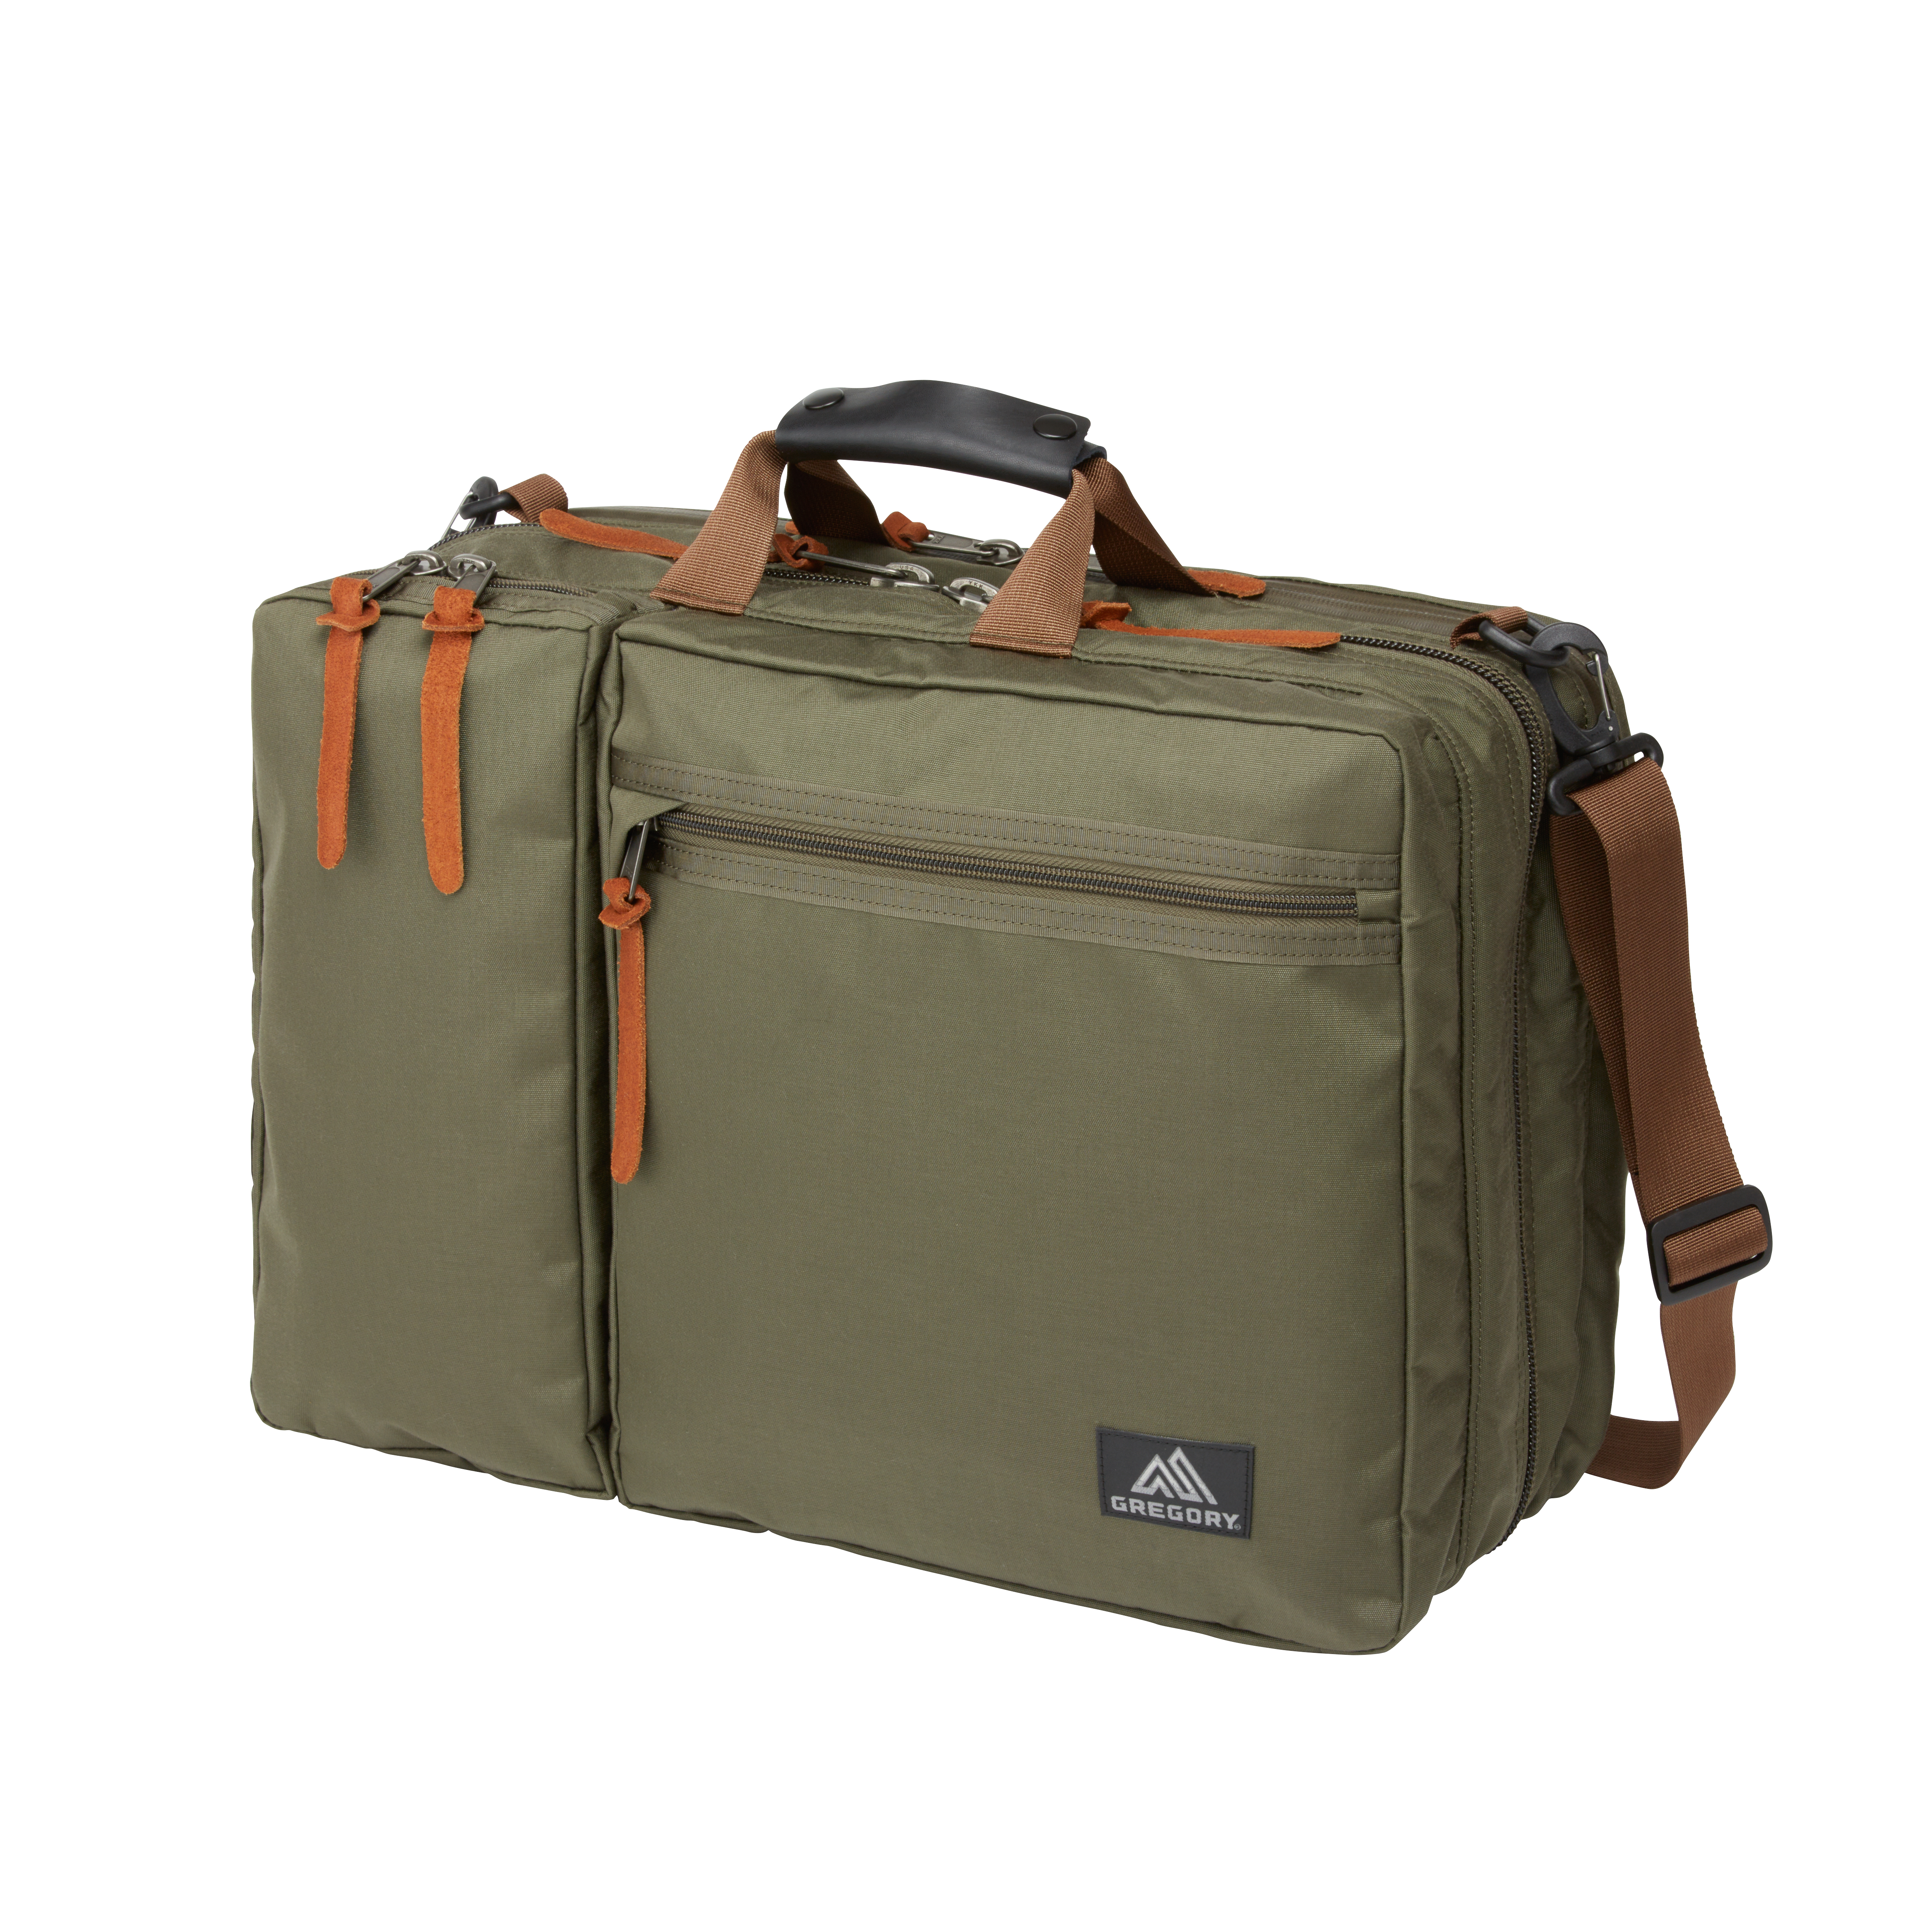 Covert Overnight Mission - Briefcase Backpack Hybrid